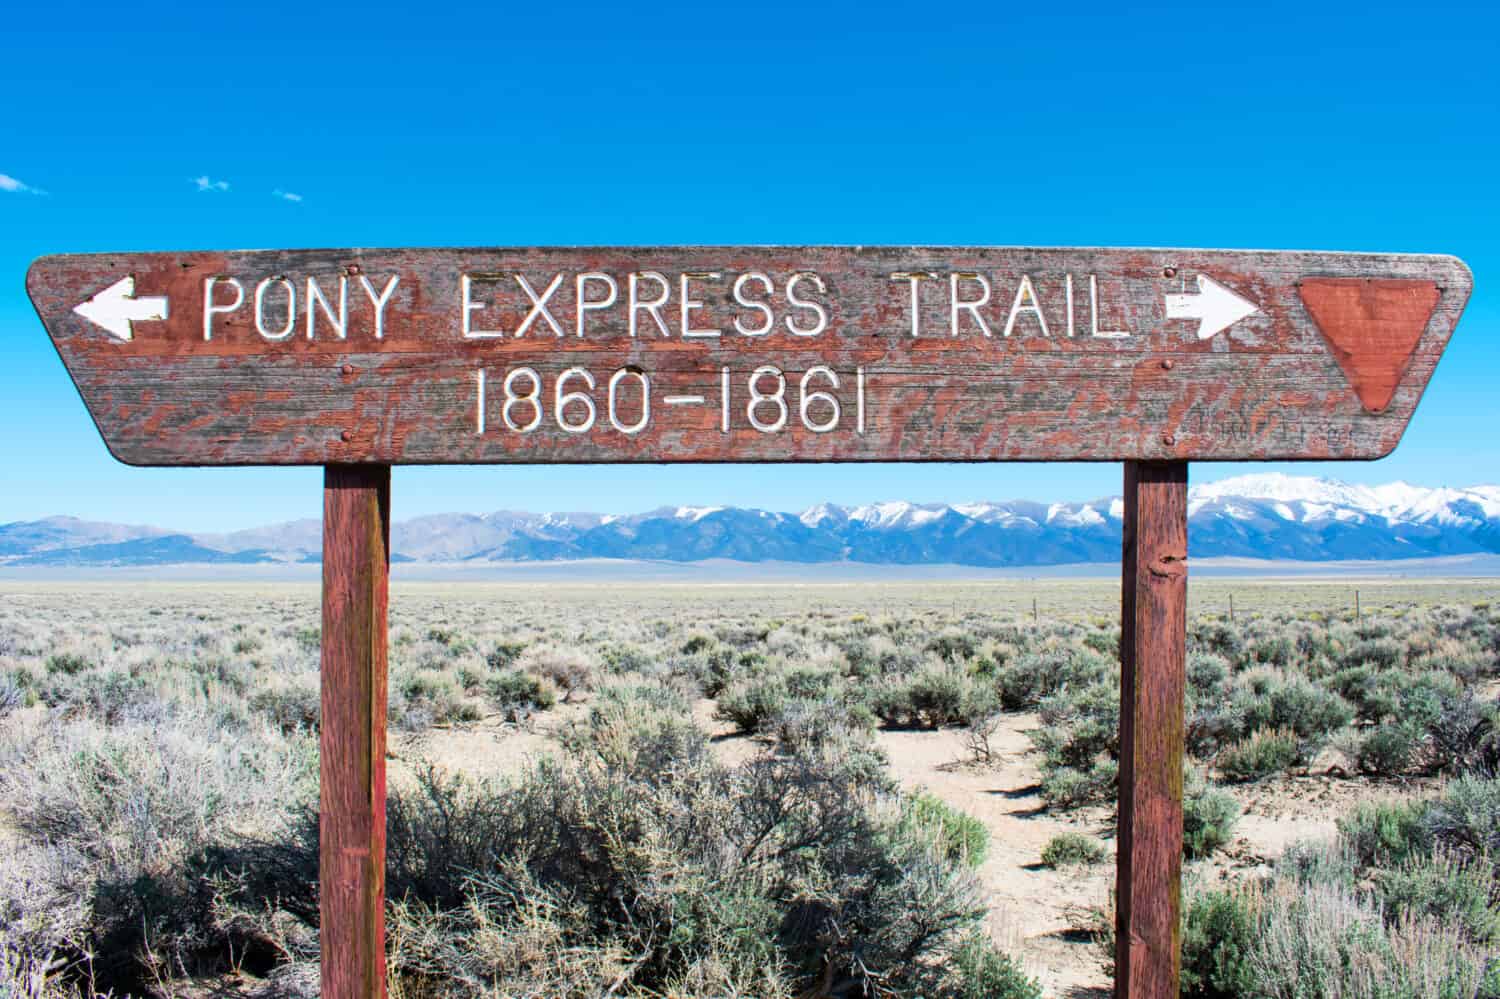 Pony Express Trail. The American West.